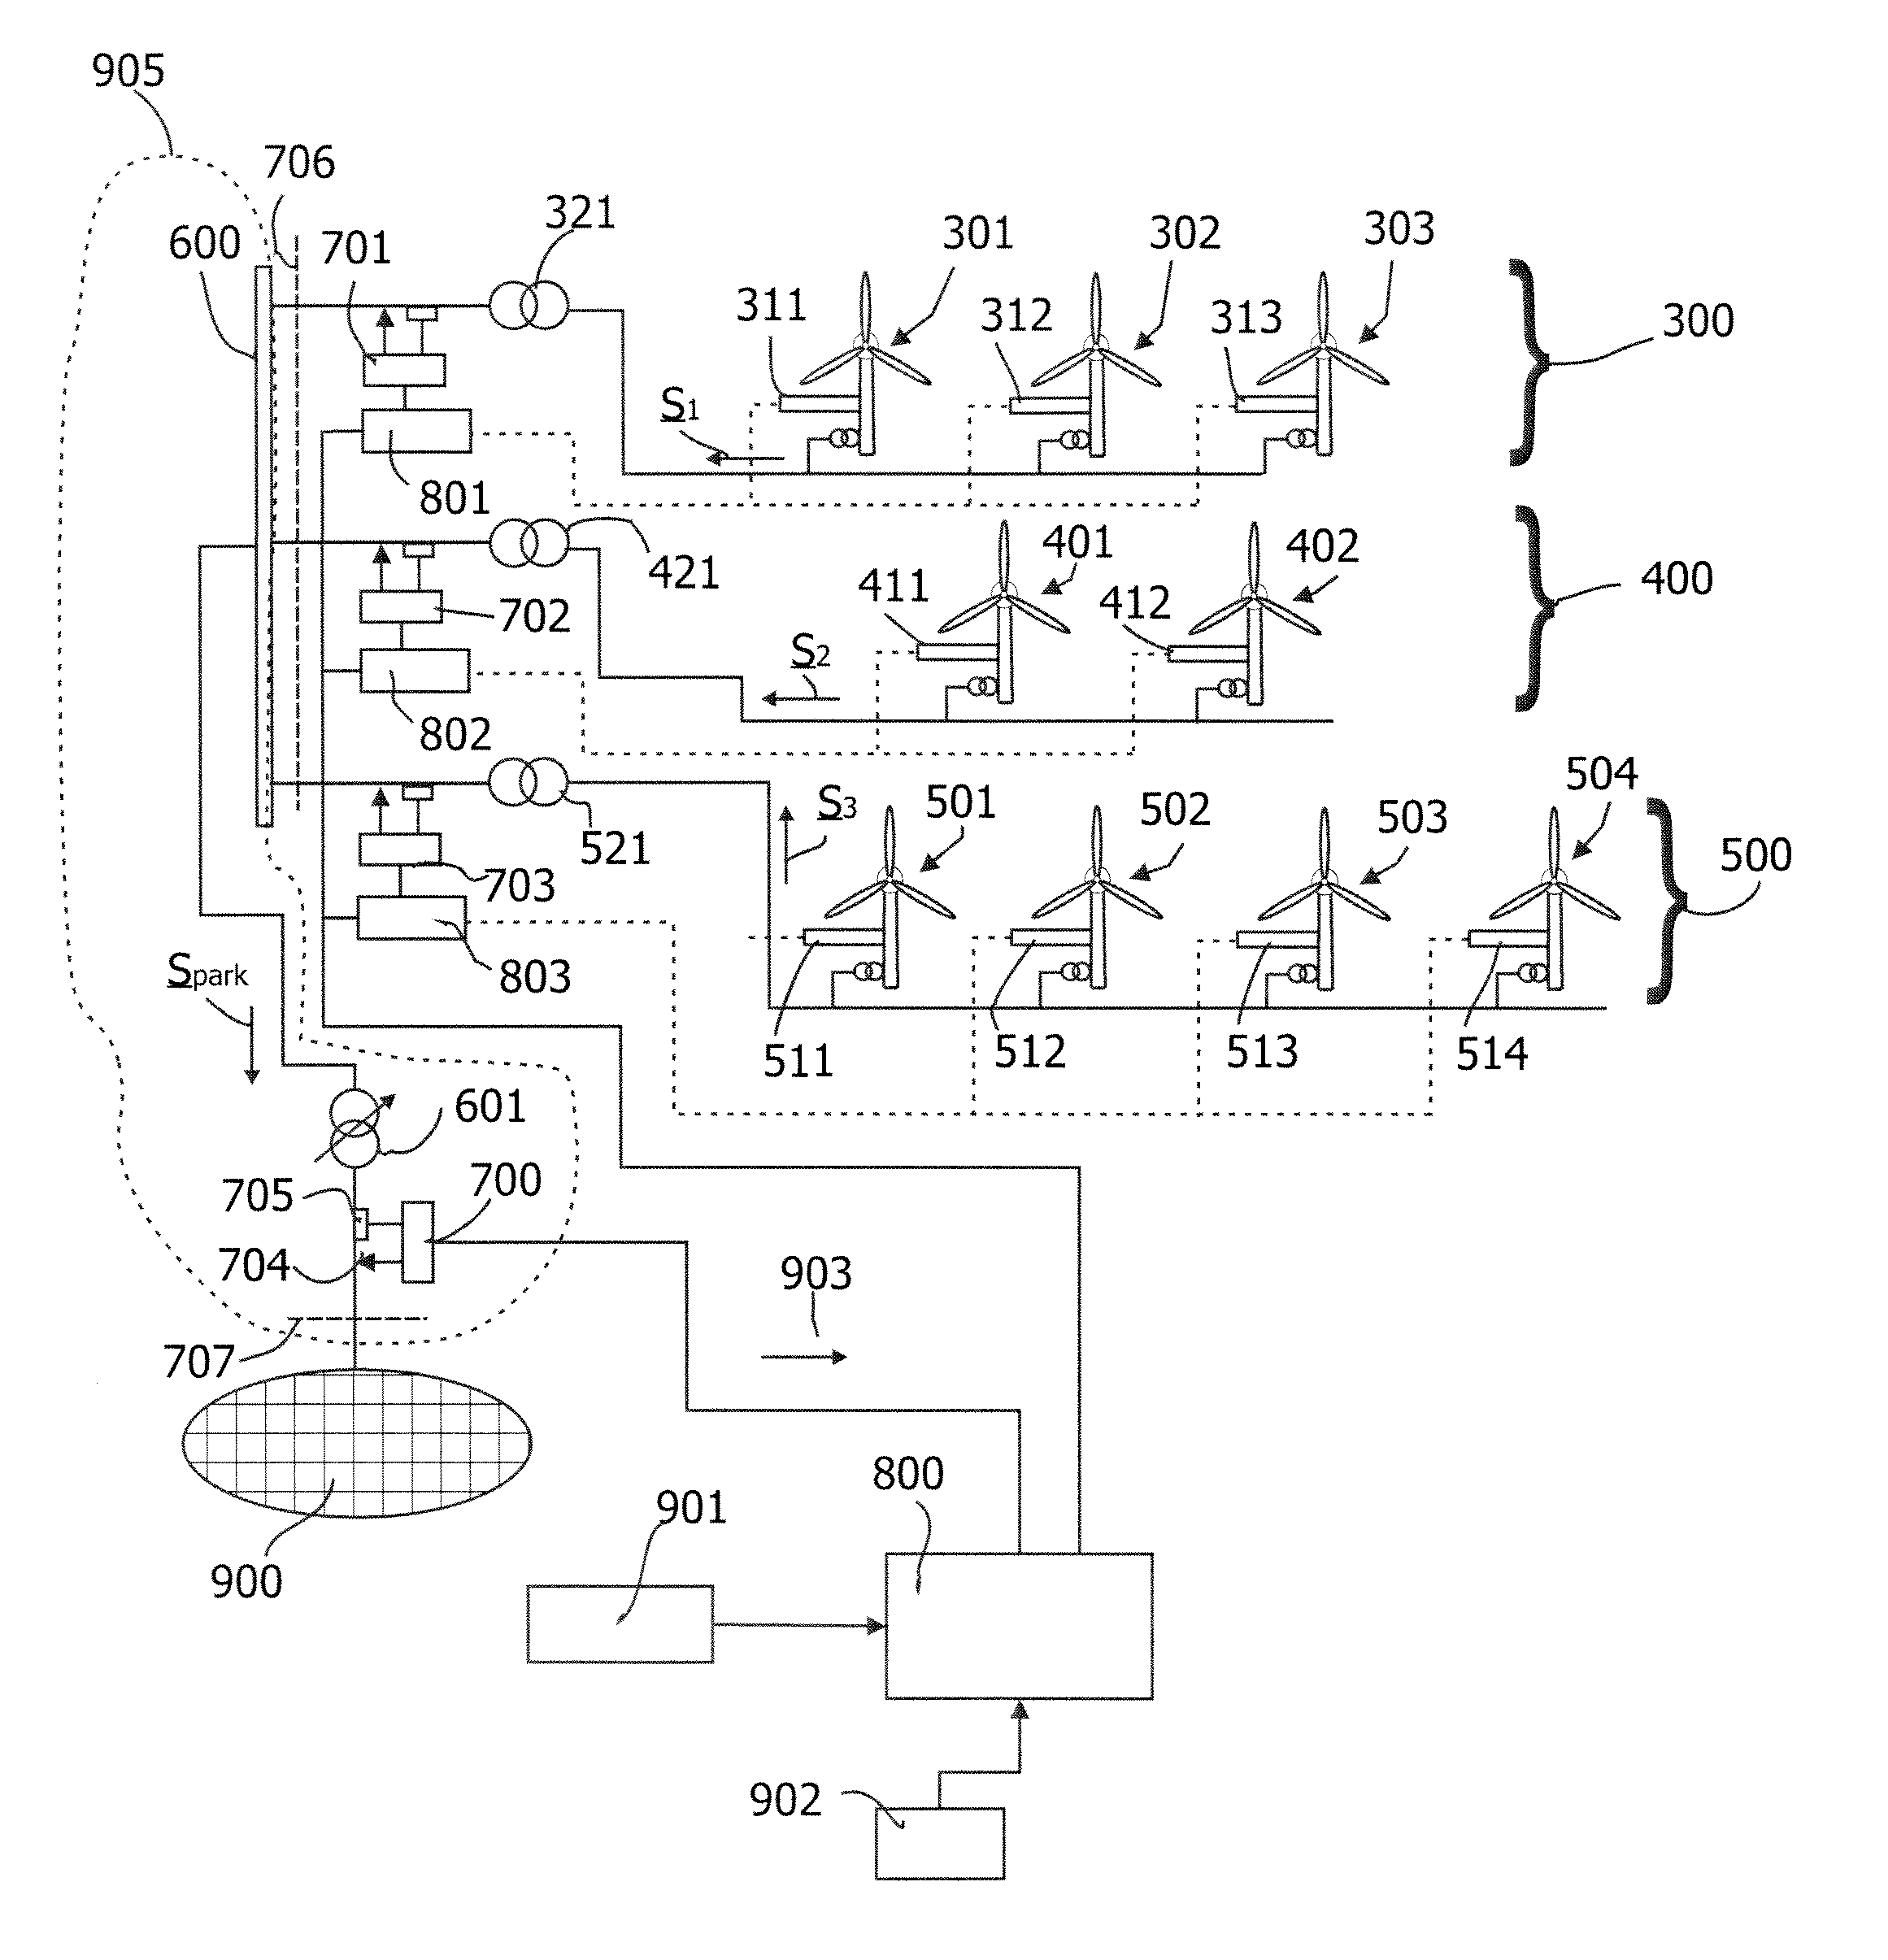 Reactive power controller for controlling reactive power in a wind farm